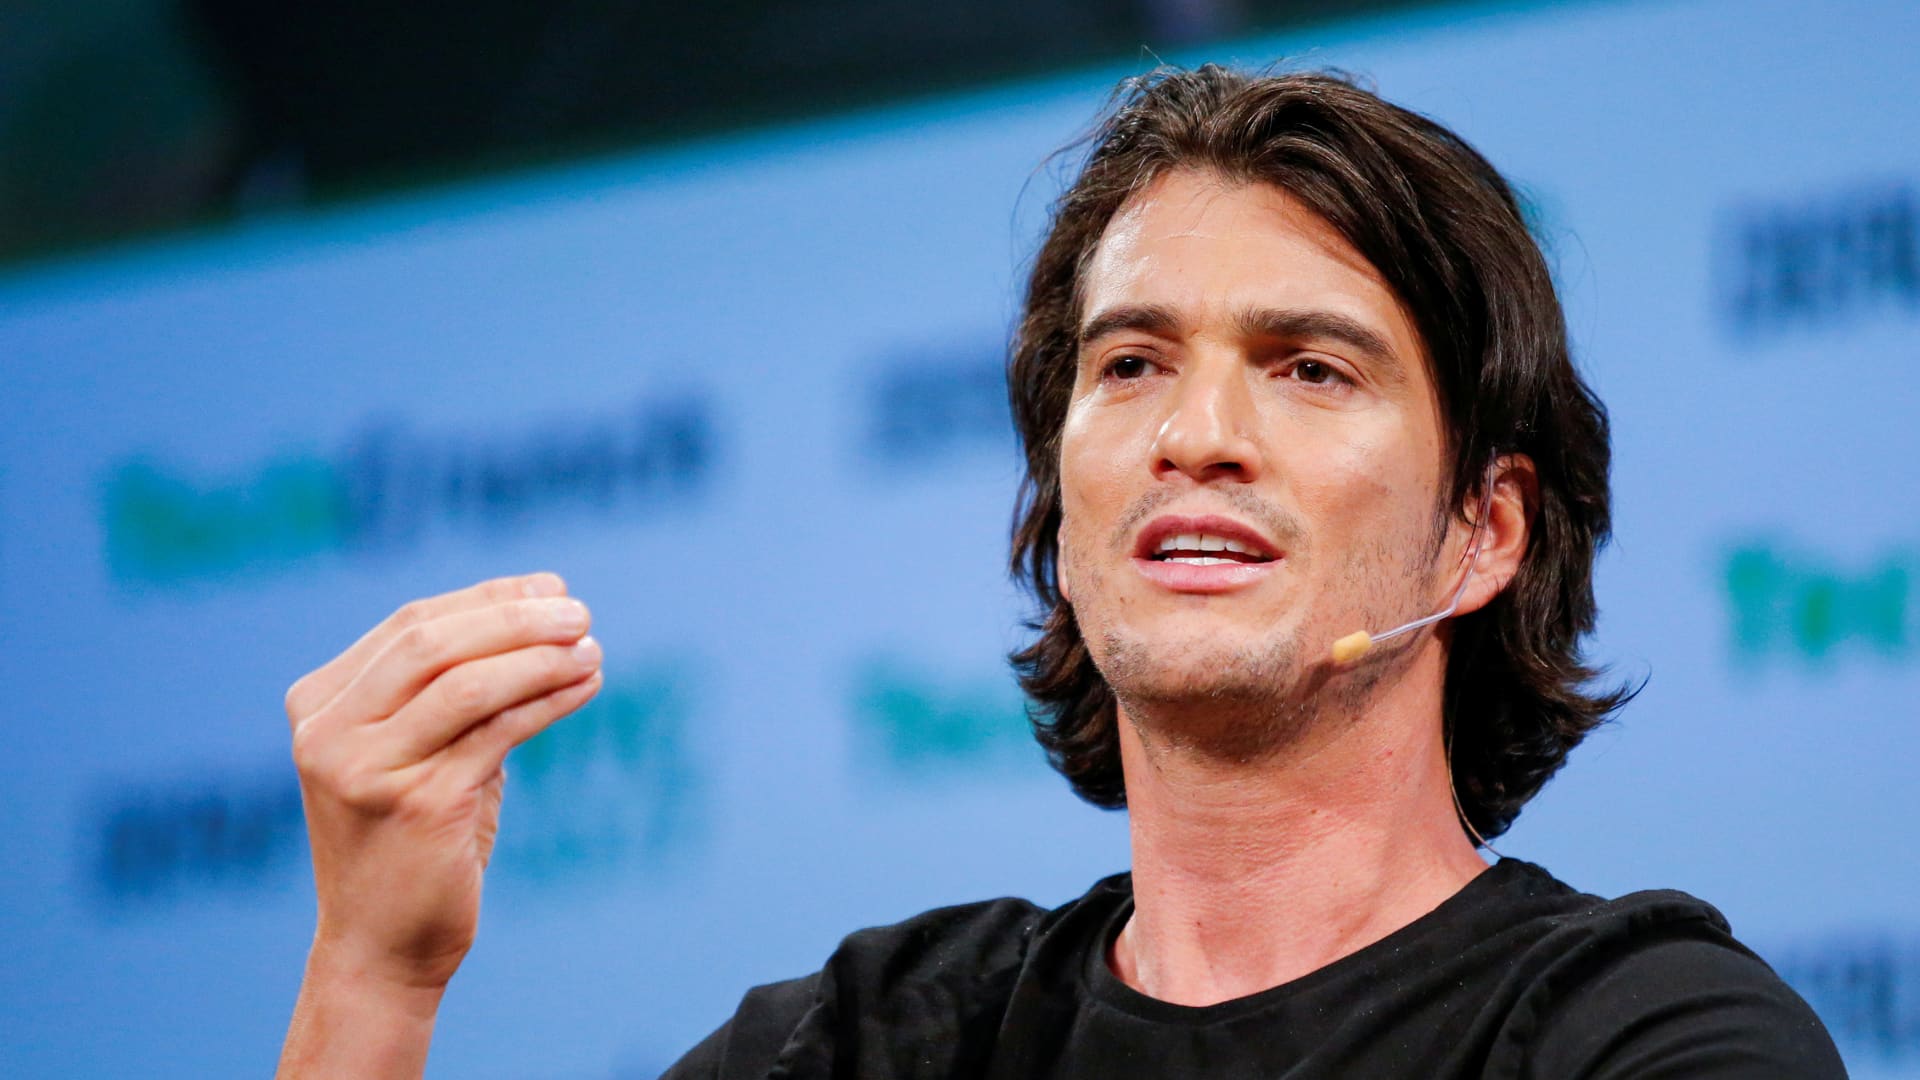 Adam Neumann is trying to buy bankrupt WeWork, DealBook reports